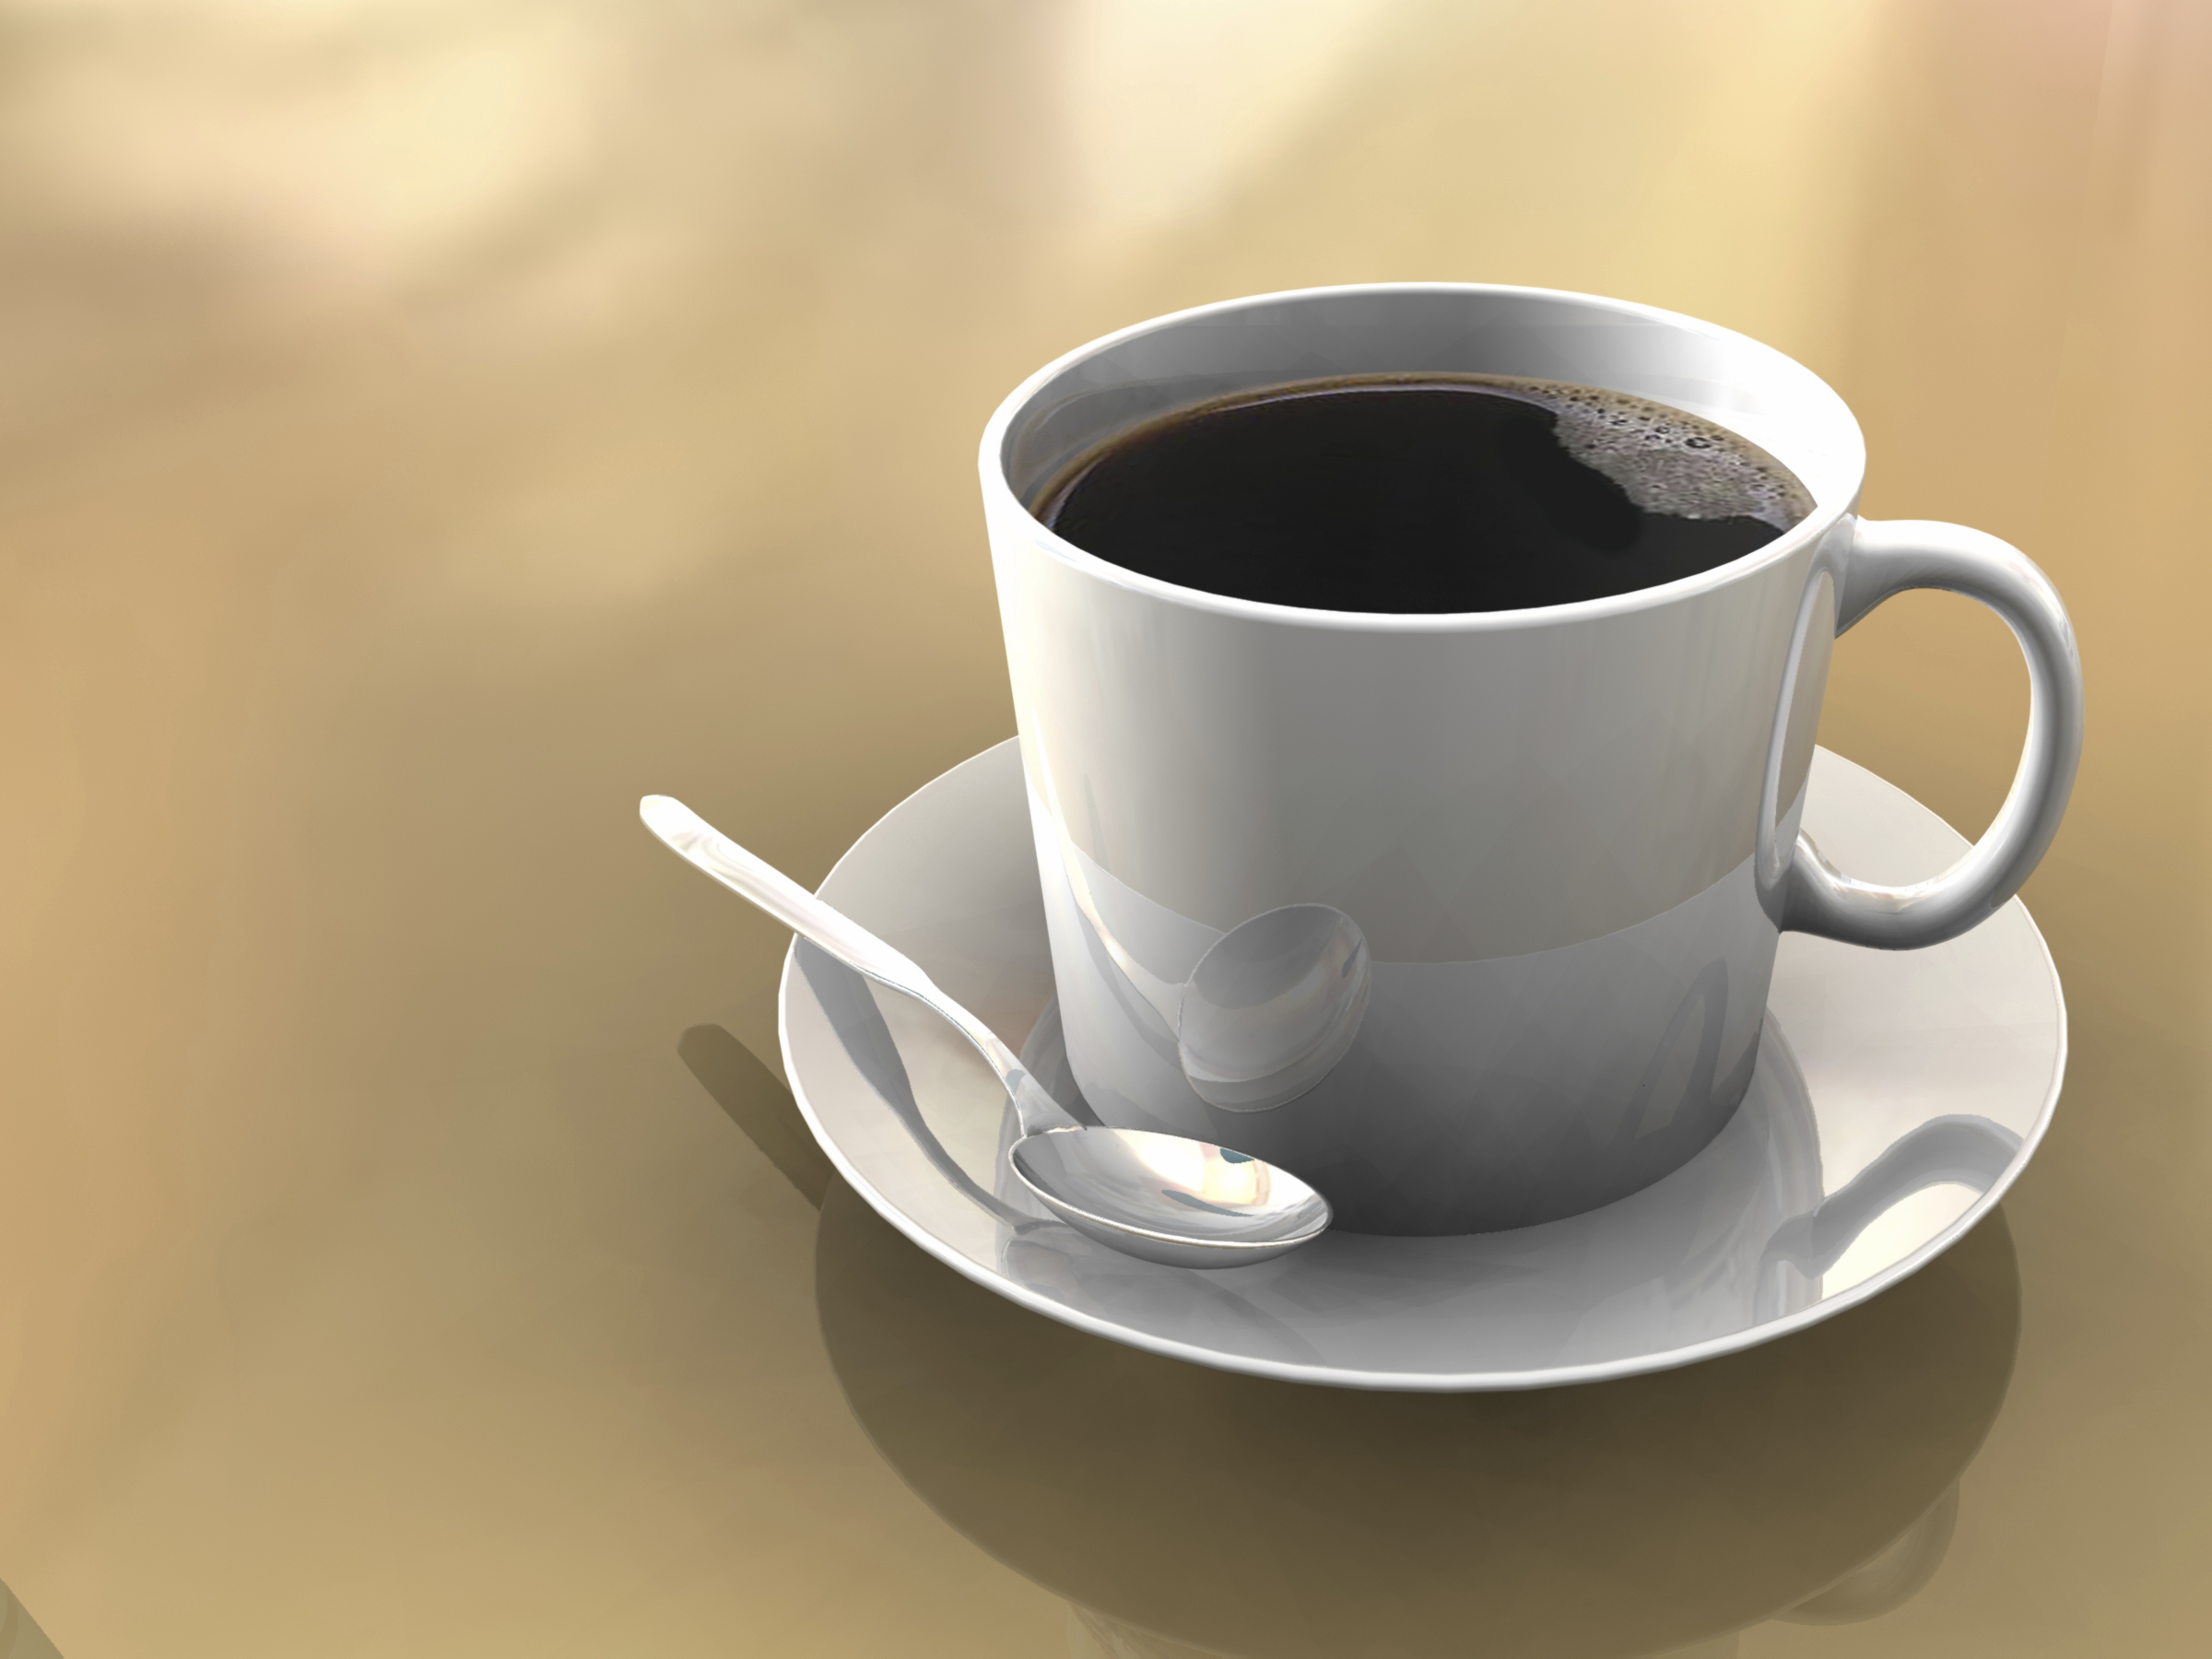 Do you go for the cup or the coffee? – Get Positive